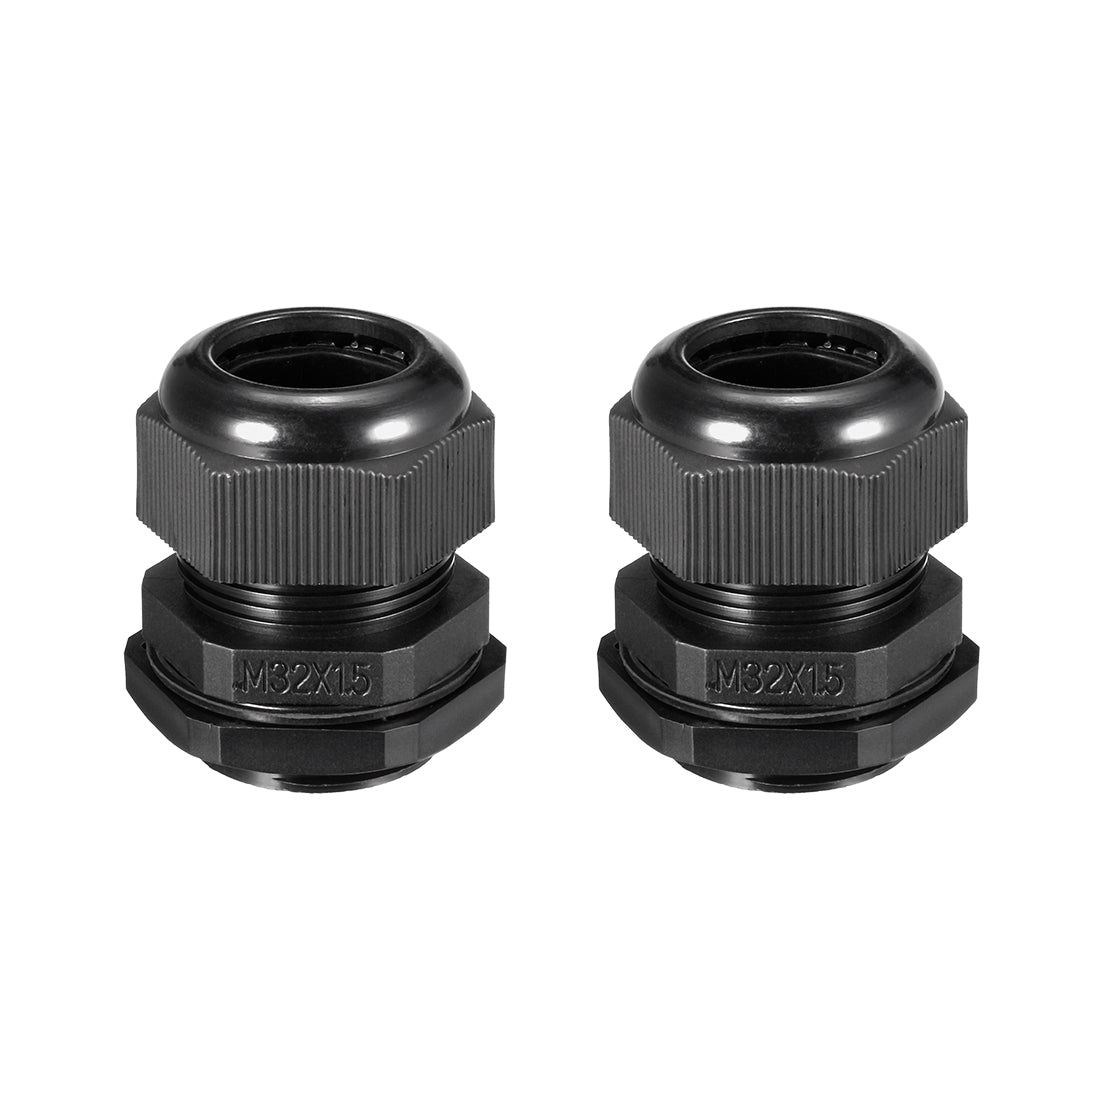 Uxcell Uxcell M25 Cable Gland Waterproof Plastic Joint Adjustable Locknut Black for 9mm-16mm Dia Cable Wire 2 Pcs